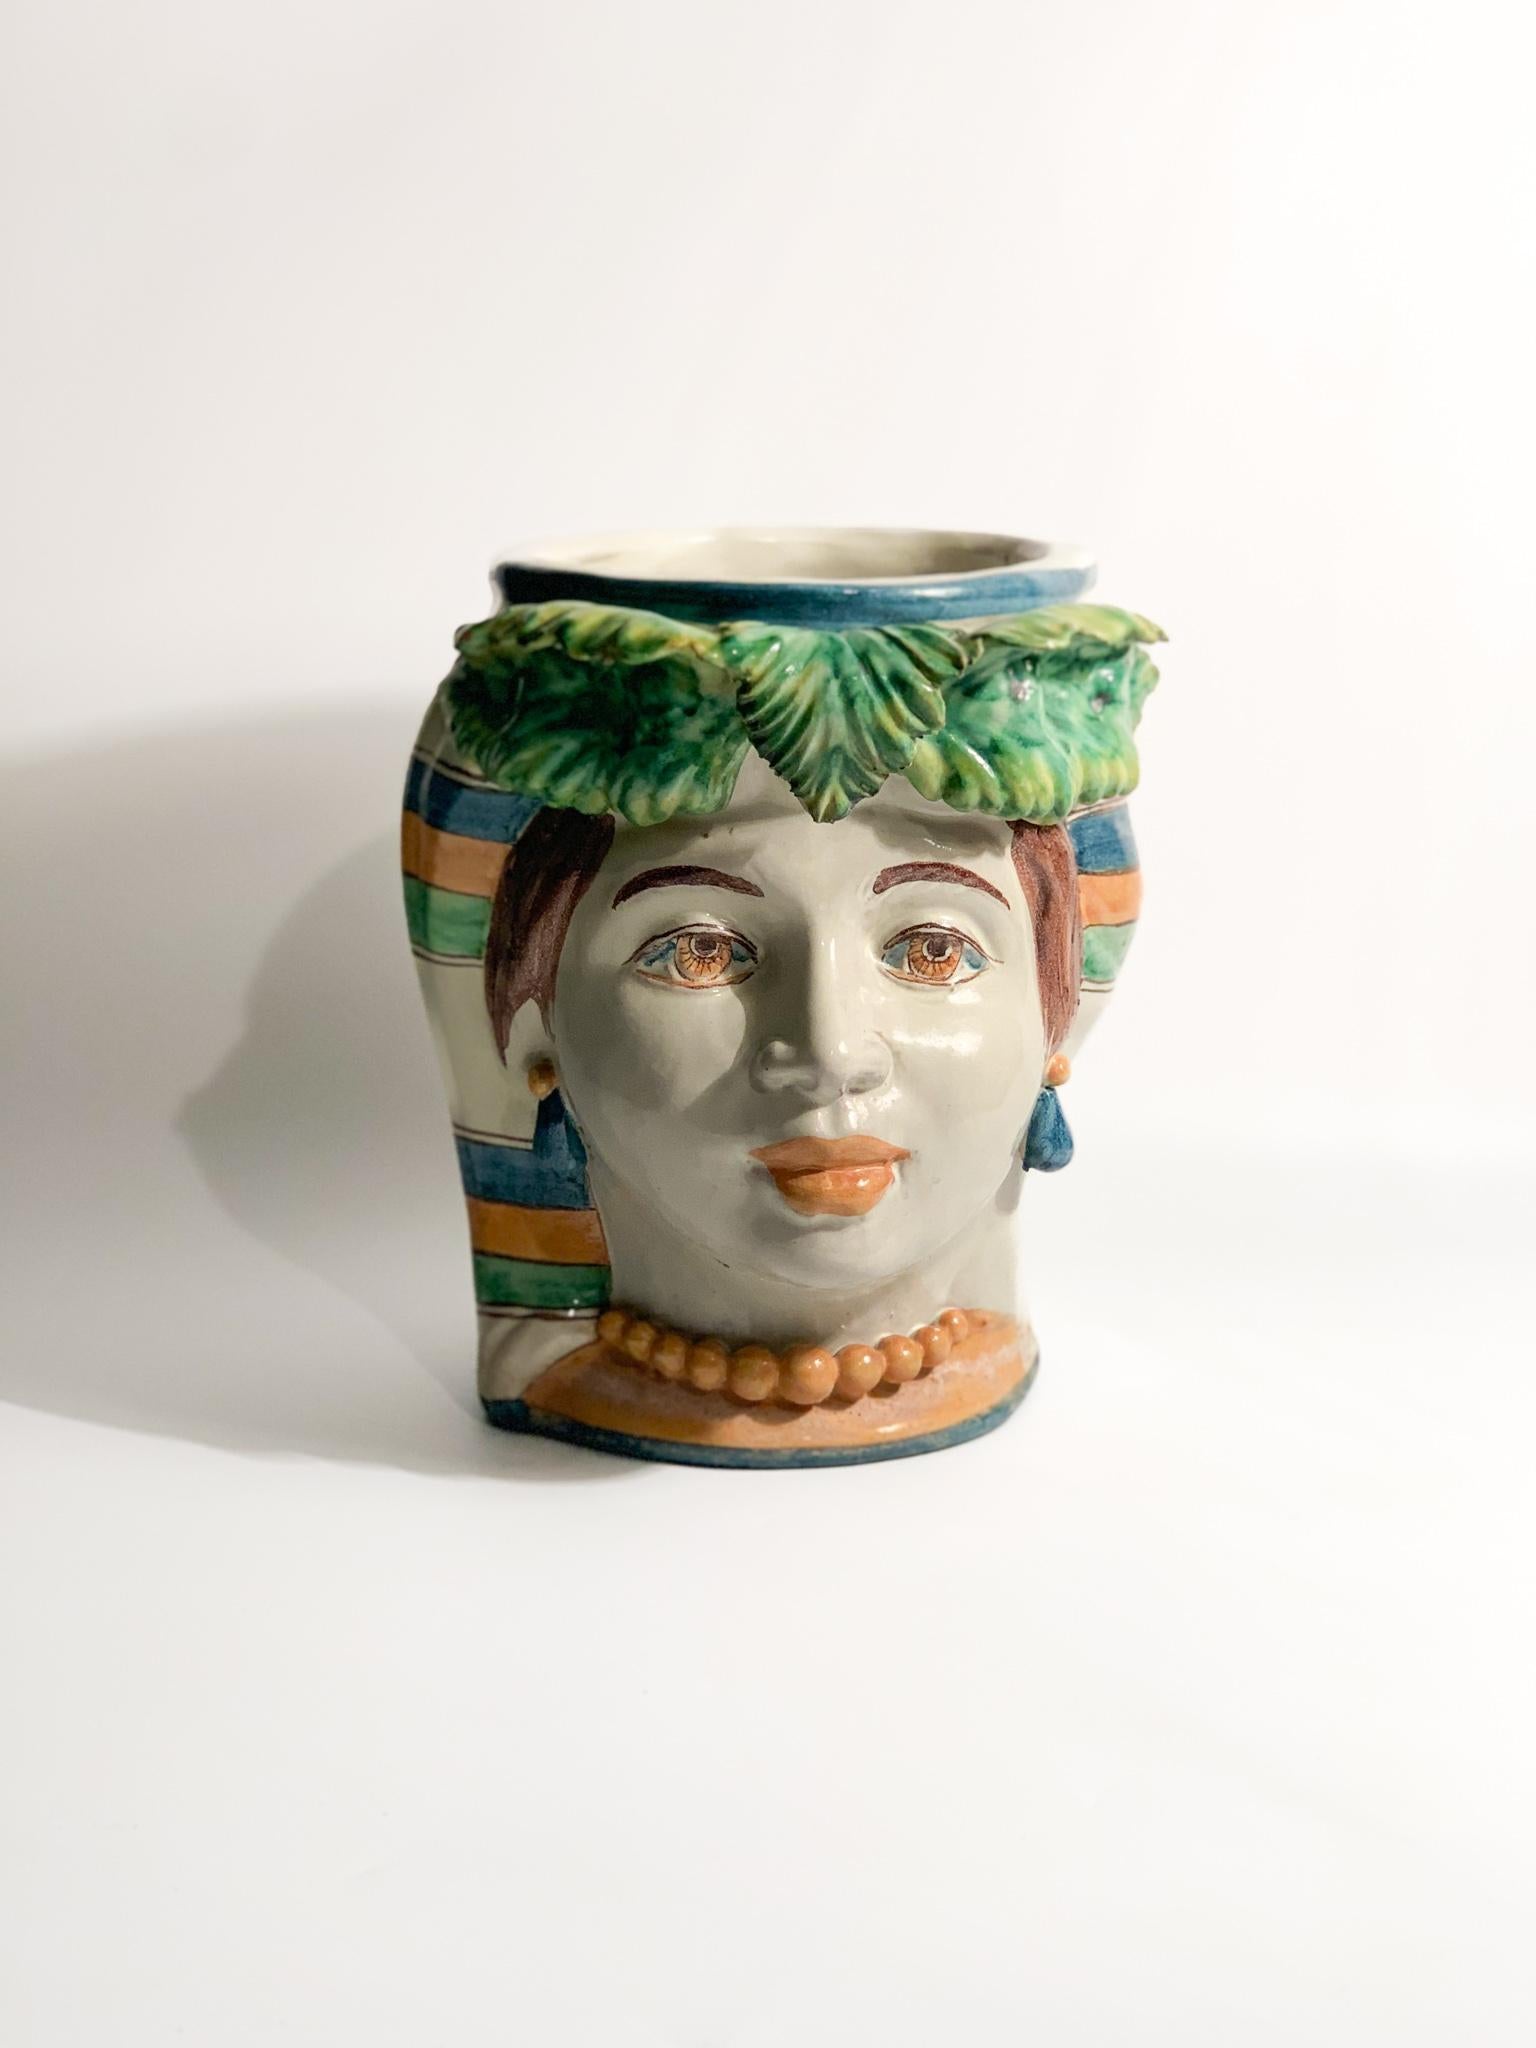 Moor's head in Caltagirone ceramic of a female figure, created by Giacomo Alessi in the 1990s

Ø cm 20 h cm 22

Giacomo Alessi is an Italian master ceramist born in Caltagirone, Sicily, in 1957. He is one of the few registered Sicilian masters in